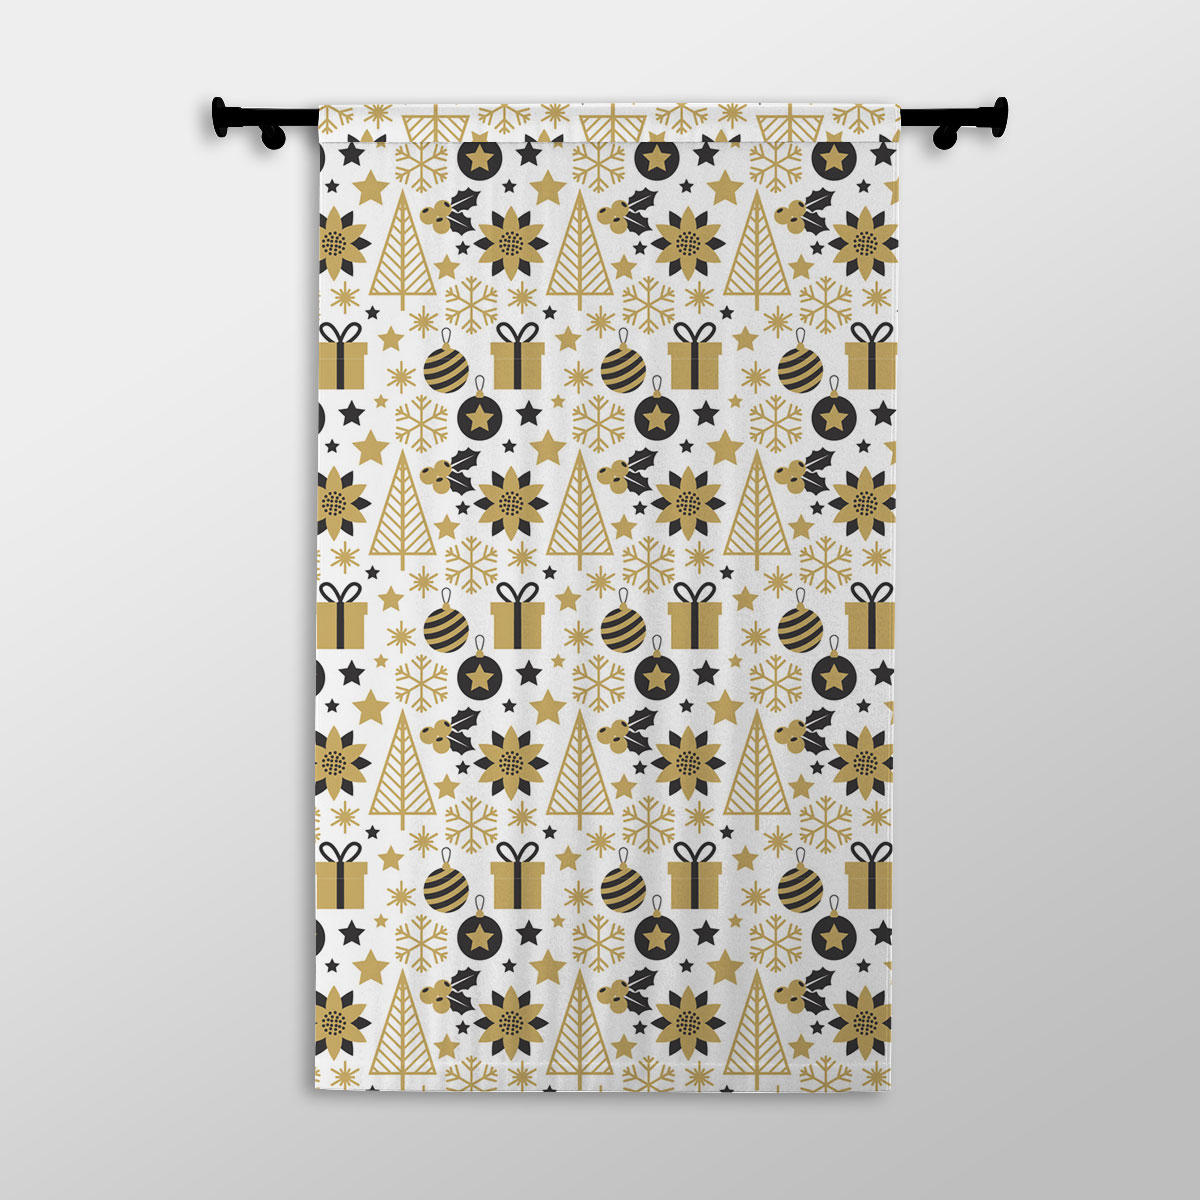 Black And Gold Christmas Gift, Holly Leaf, Snowflake On White Background Printed Window Curtains